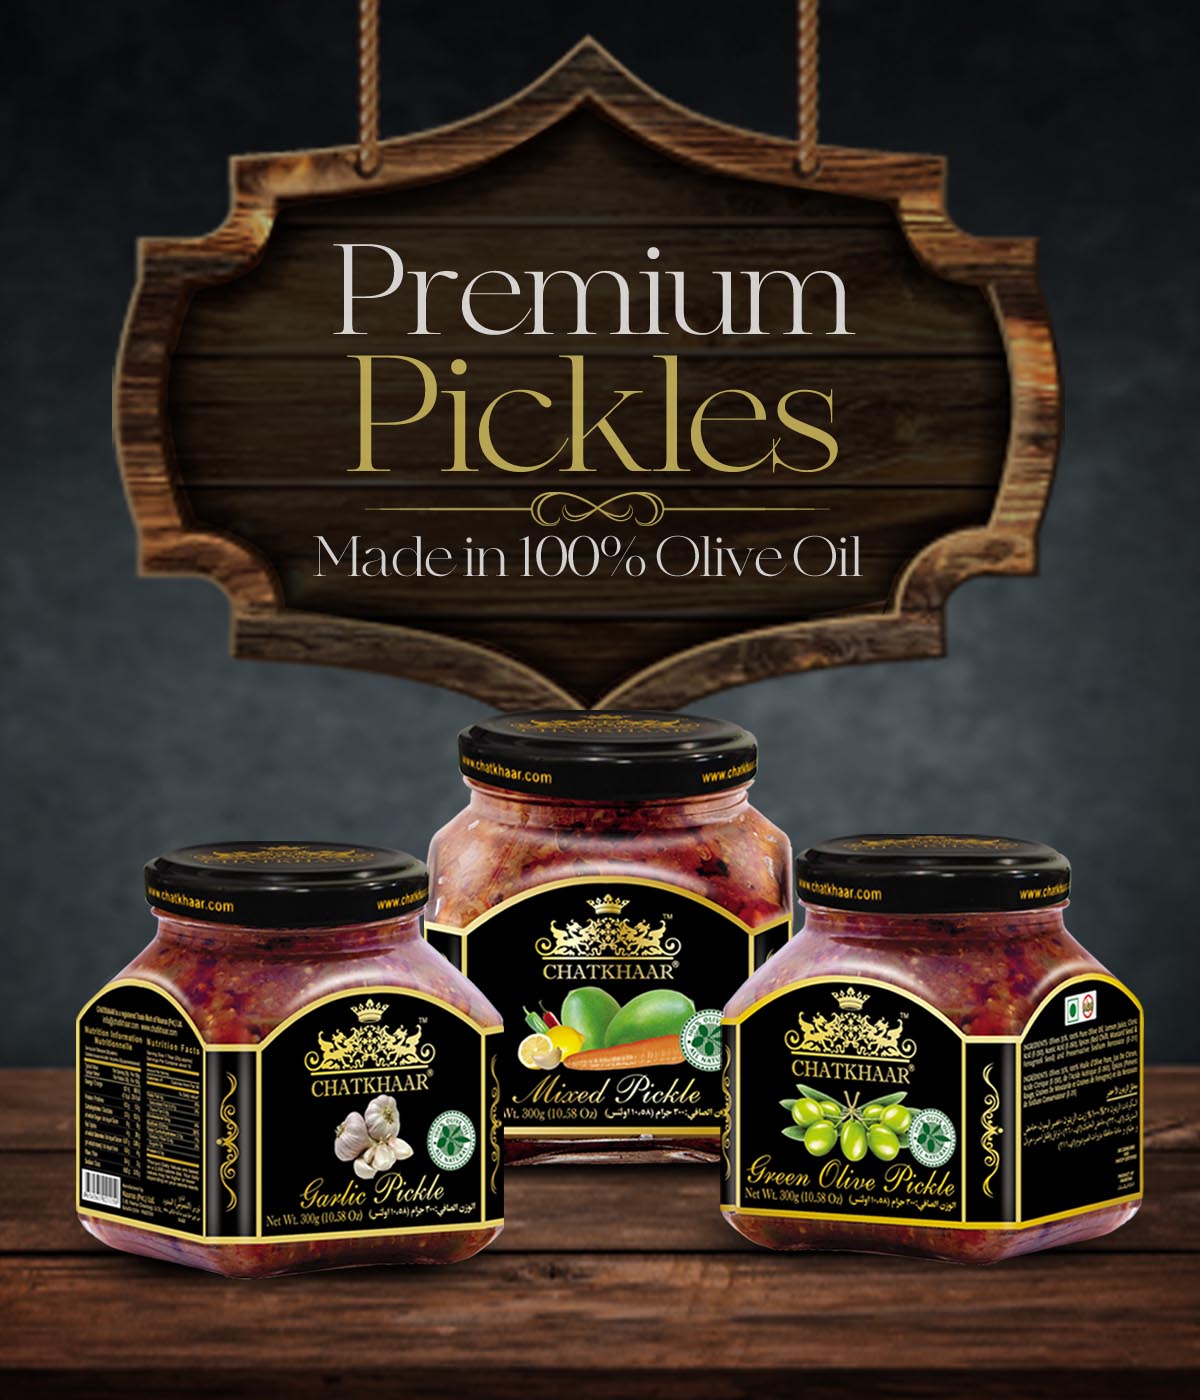 Pickles products